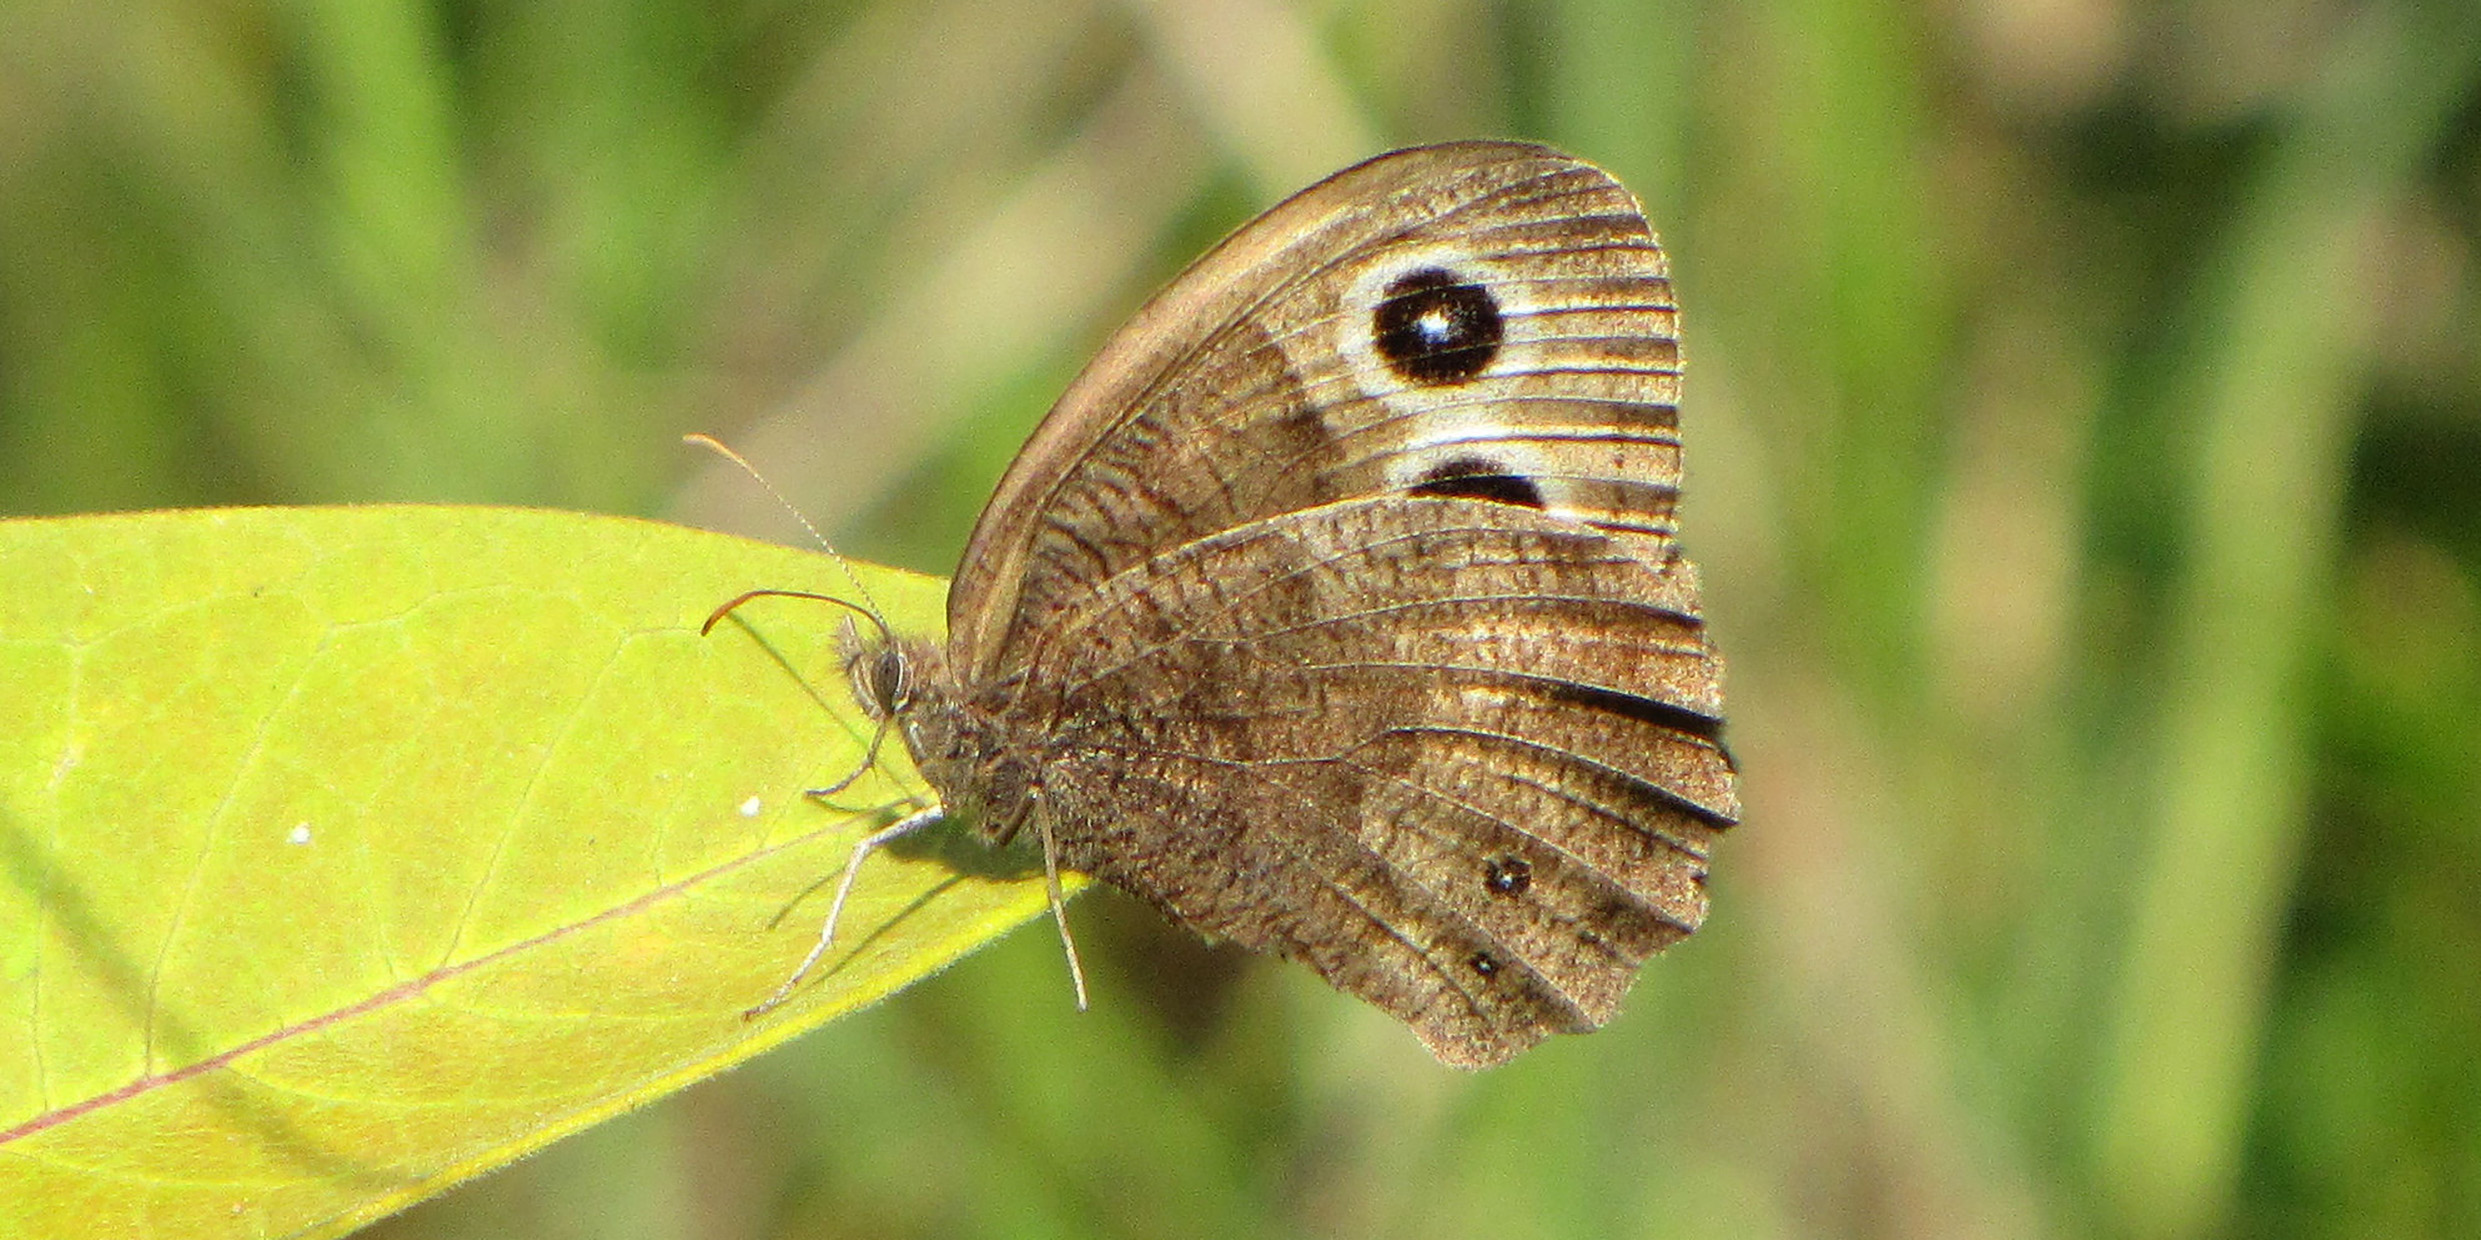 Image of brown butterfly perched on leaf